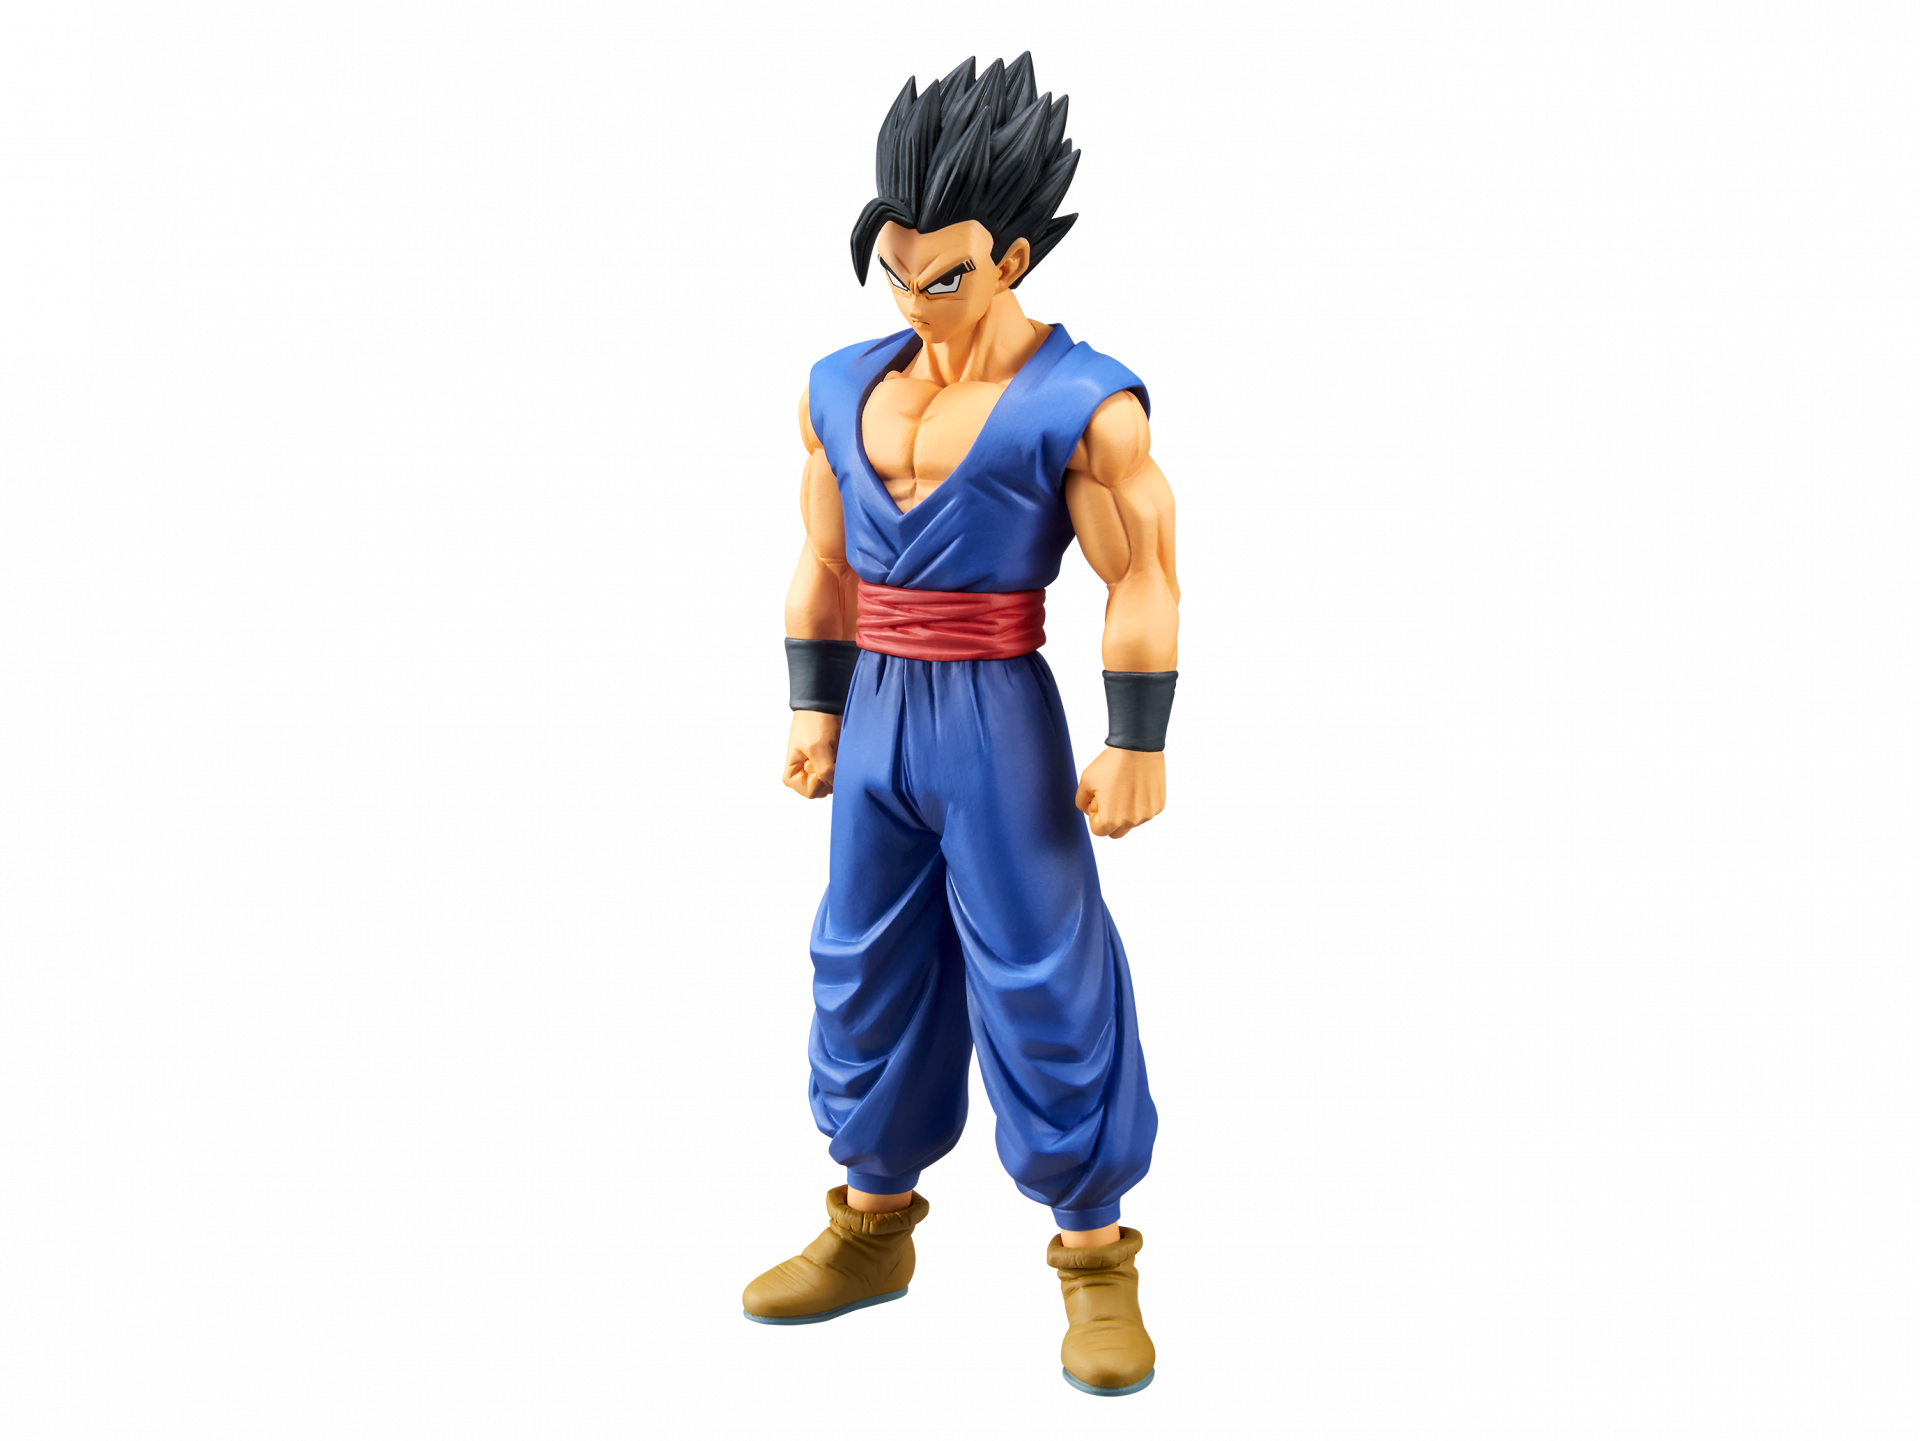 More Characters from Dragon Ball Super: SUPER HERO Coming Soon to Crane Games!